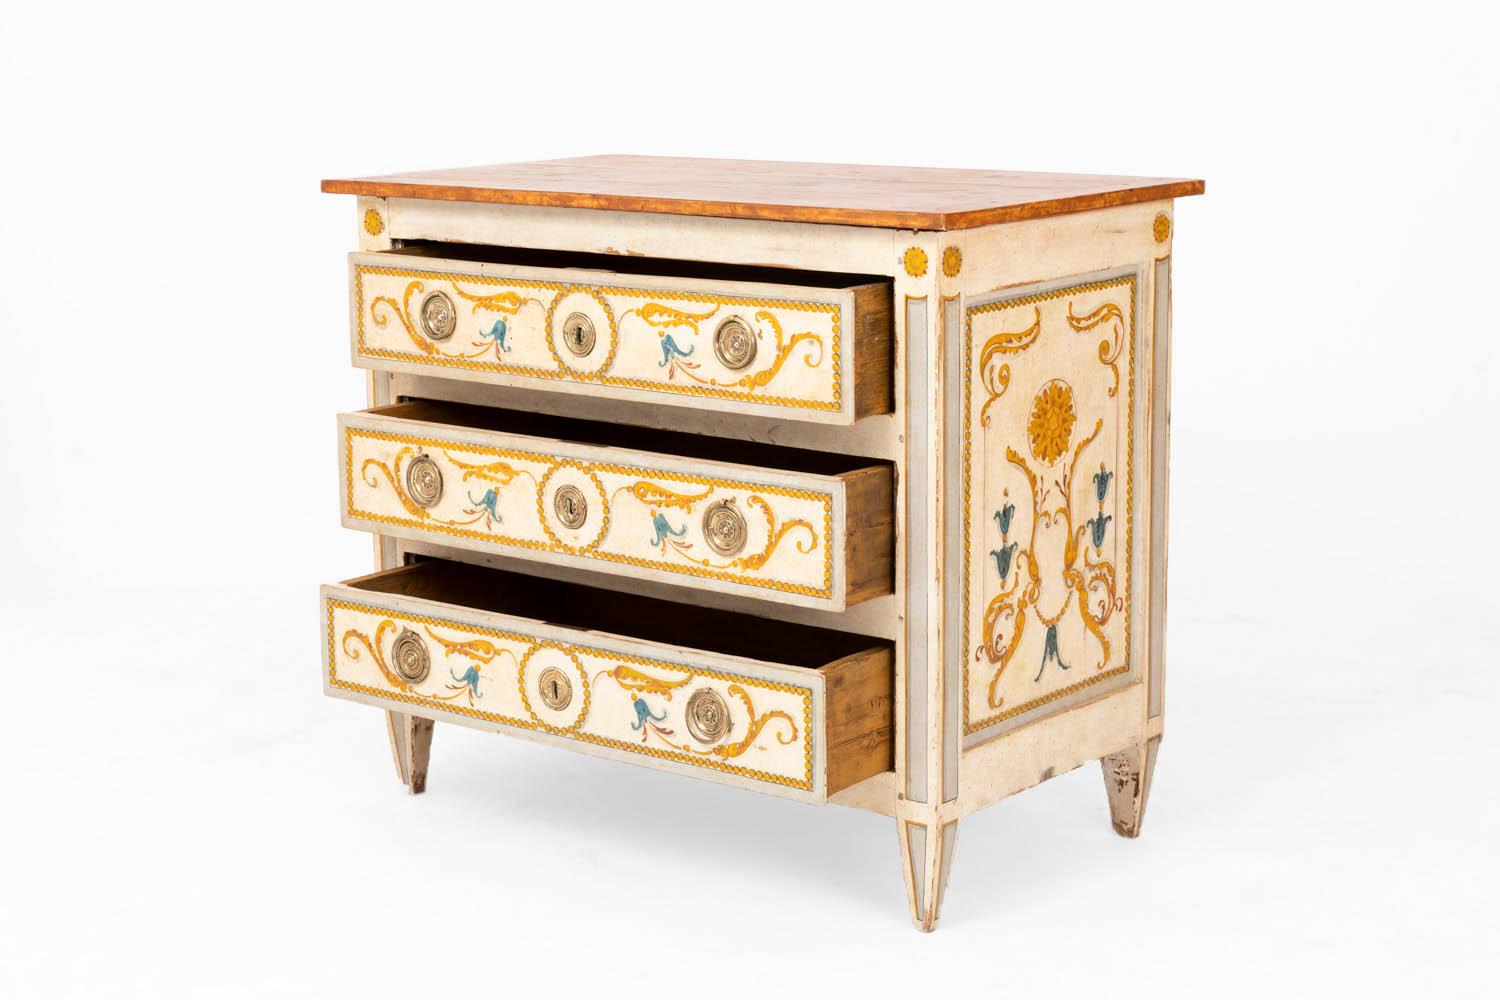 Louis XVI Commode in Painted Wood and Gilt Bronze, 18th Century (Louis XVI.)